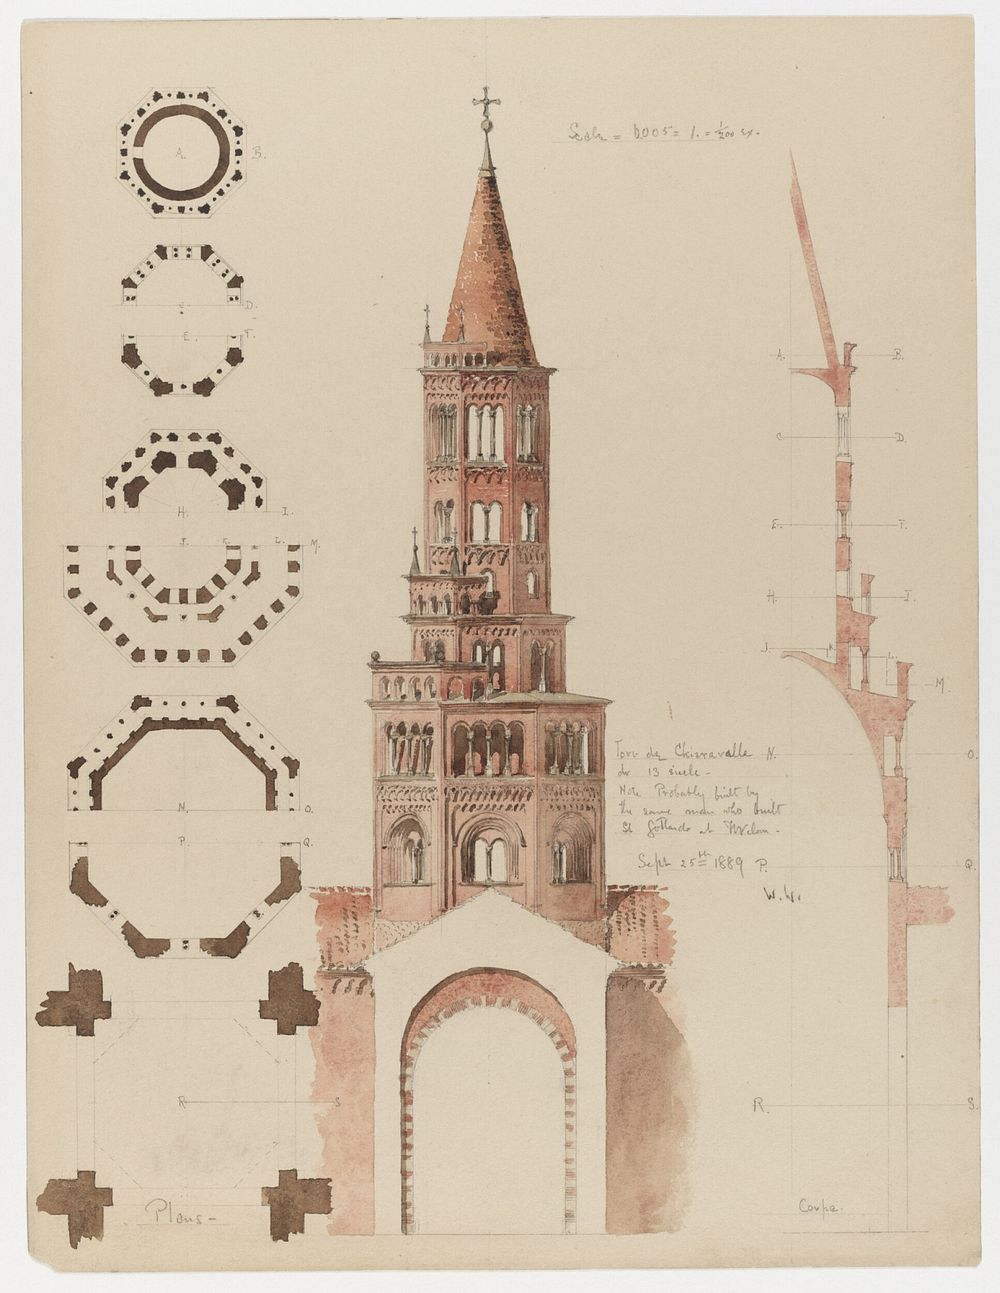 Plans, elevation, and section of the tower in Chiaravalle, Milanese, Italy